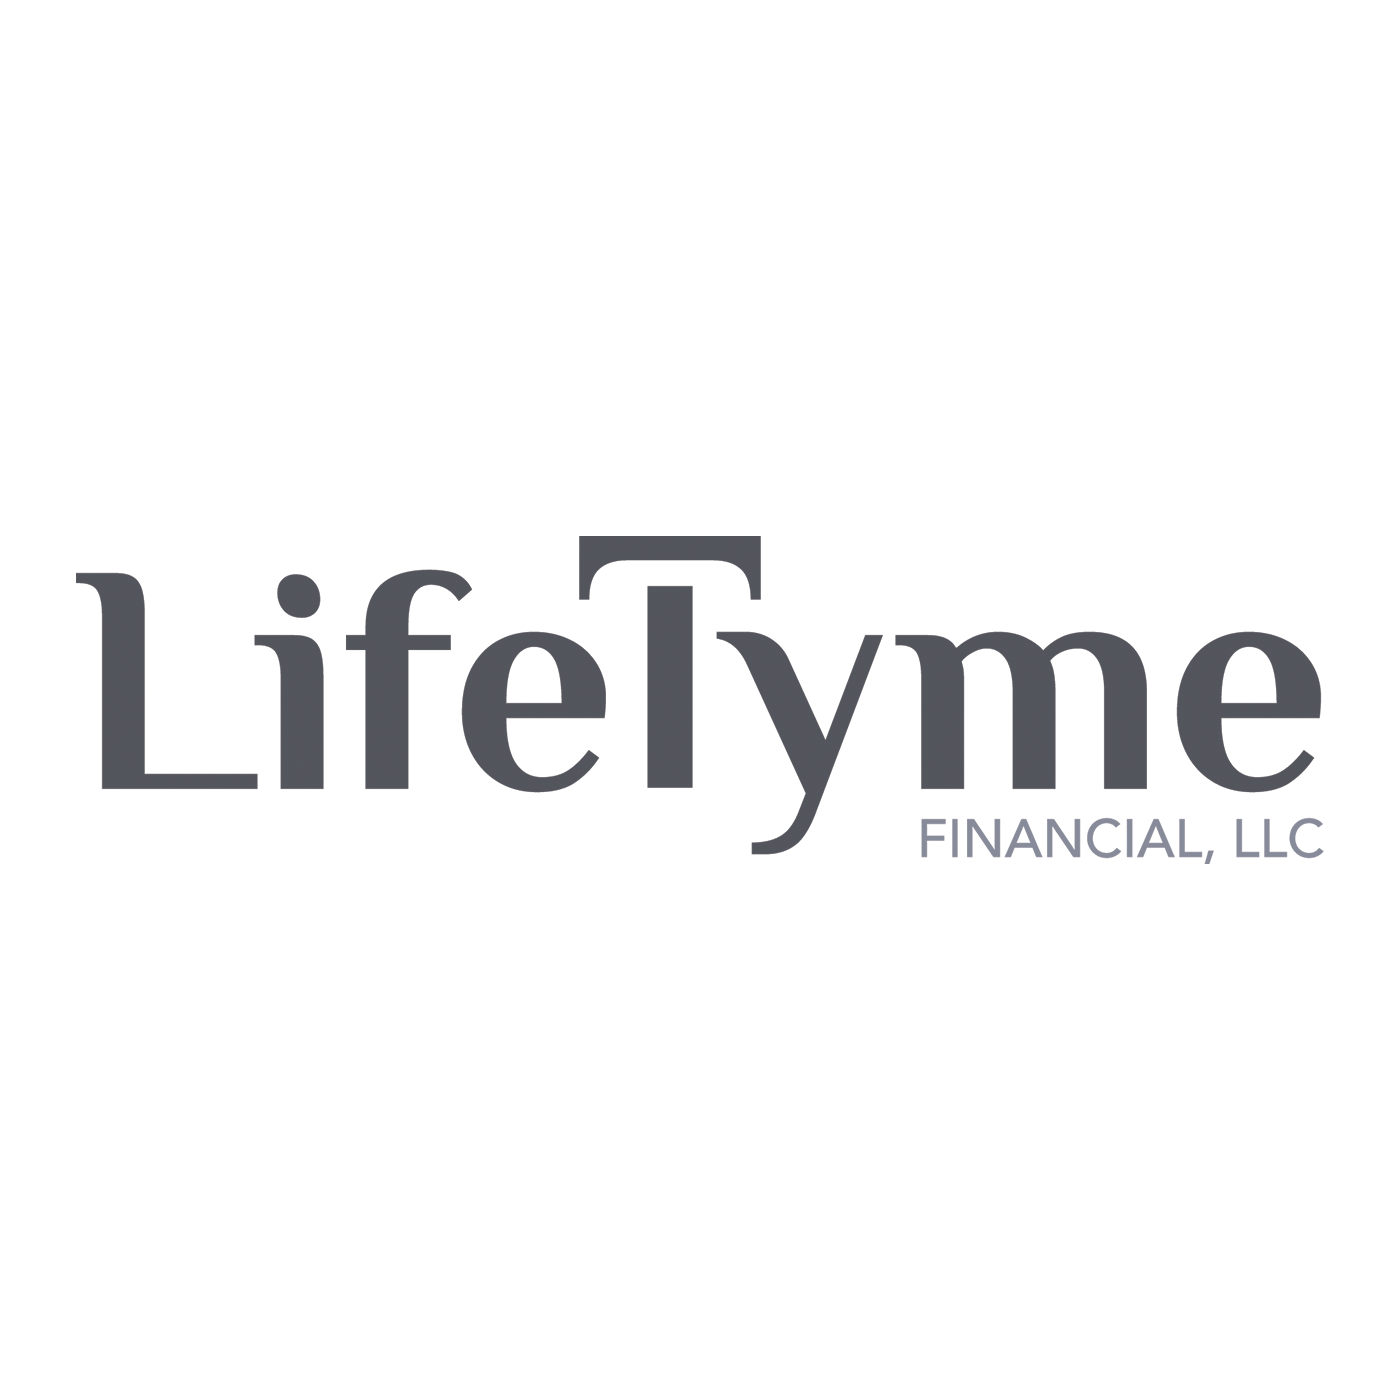 LifeTyme Lesson on Life Insurance - Part 2